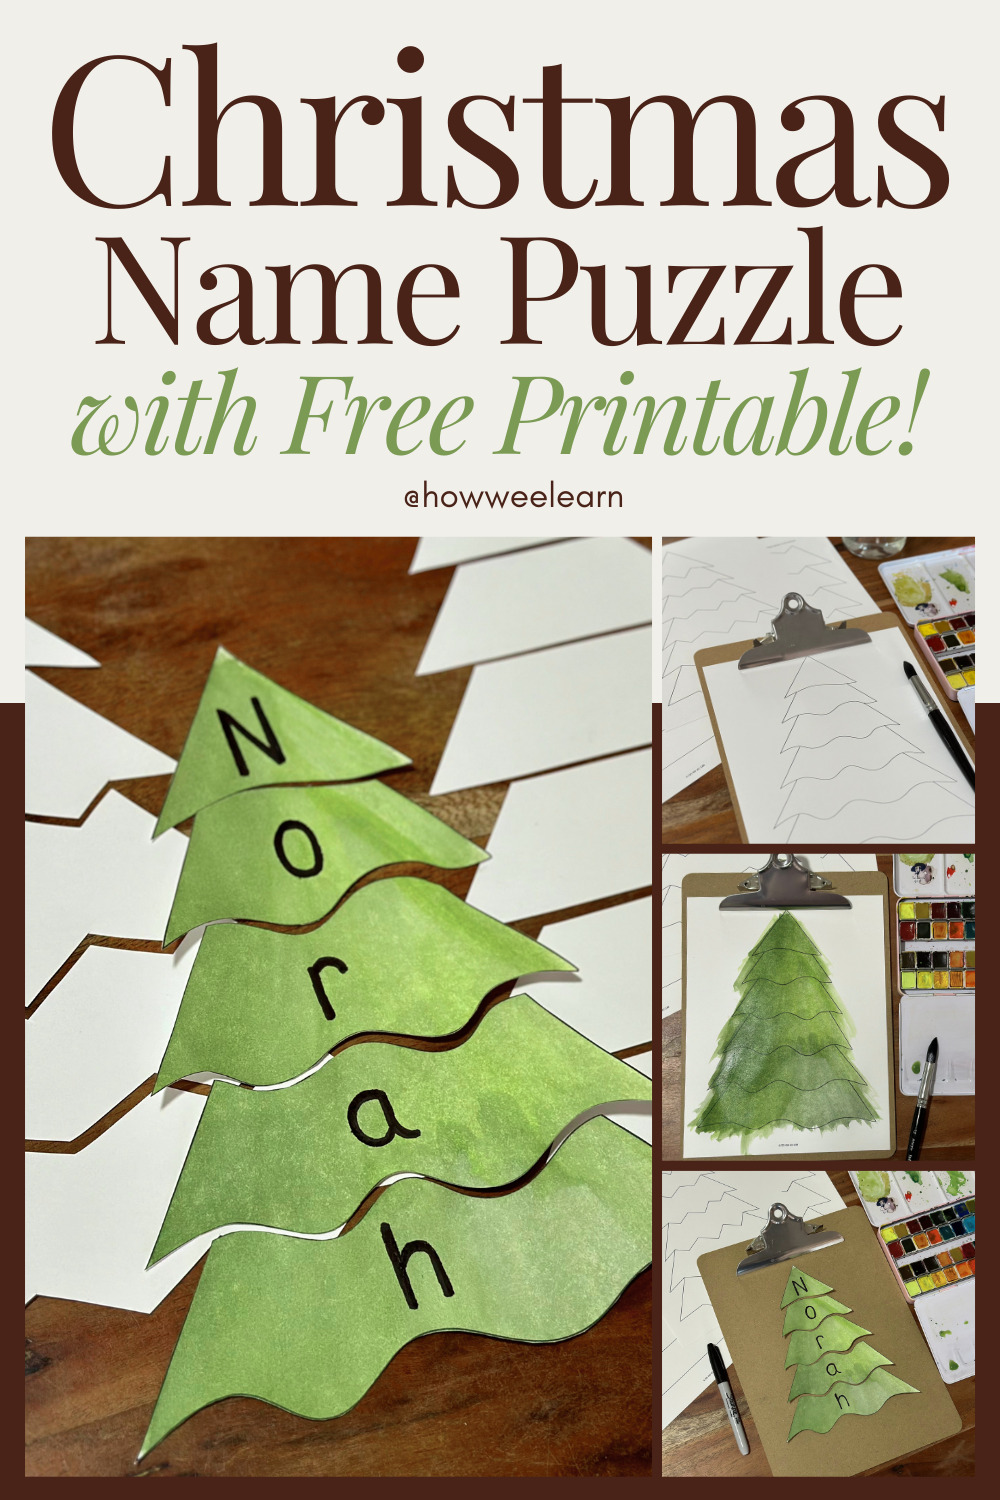 Christmas Name Puzzle with Free Printable